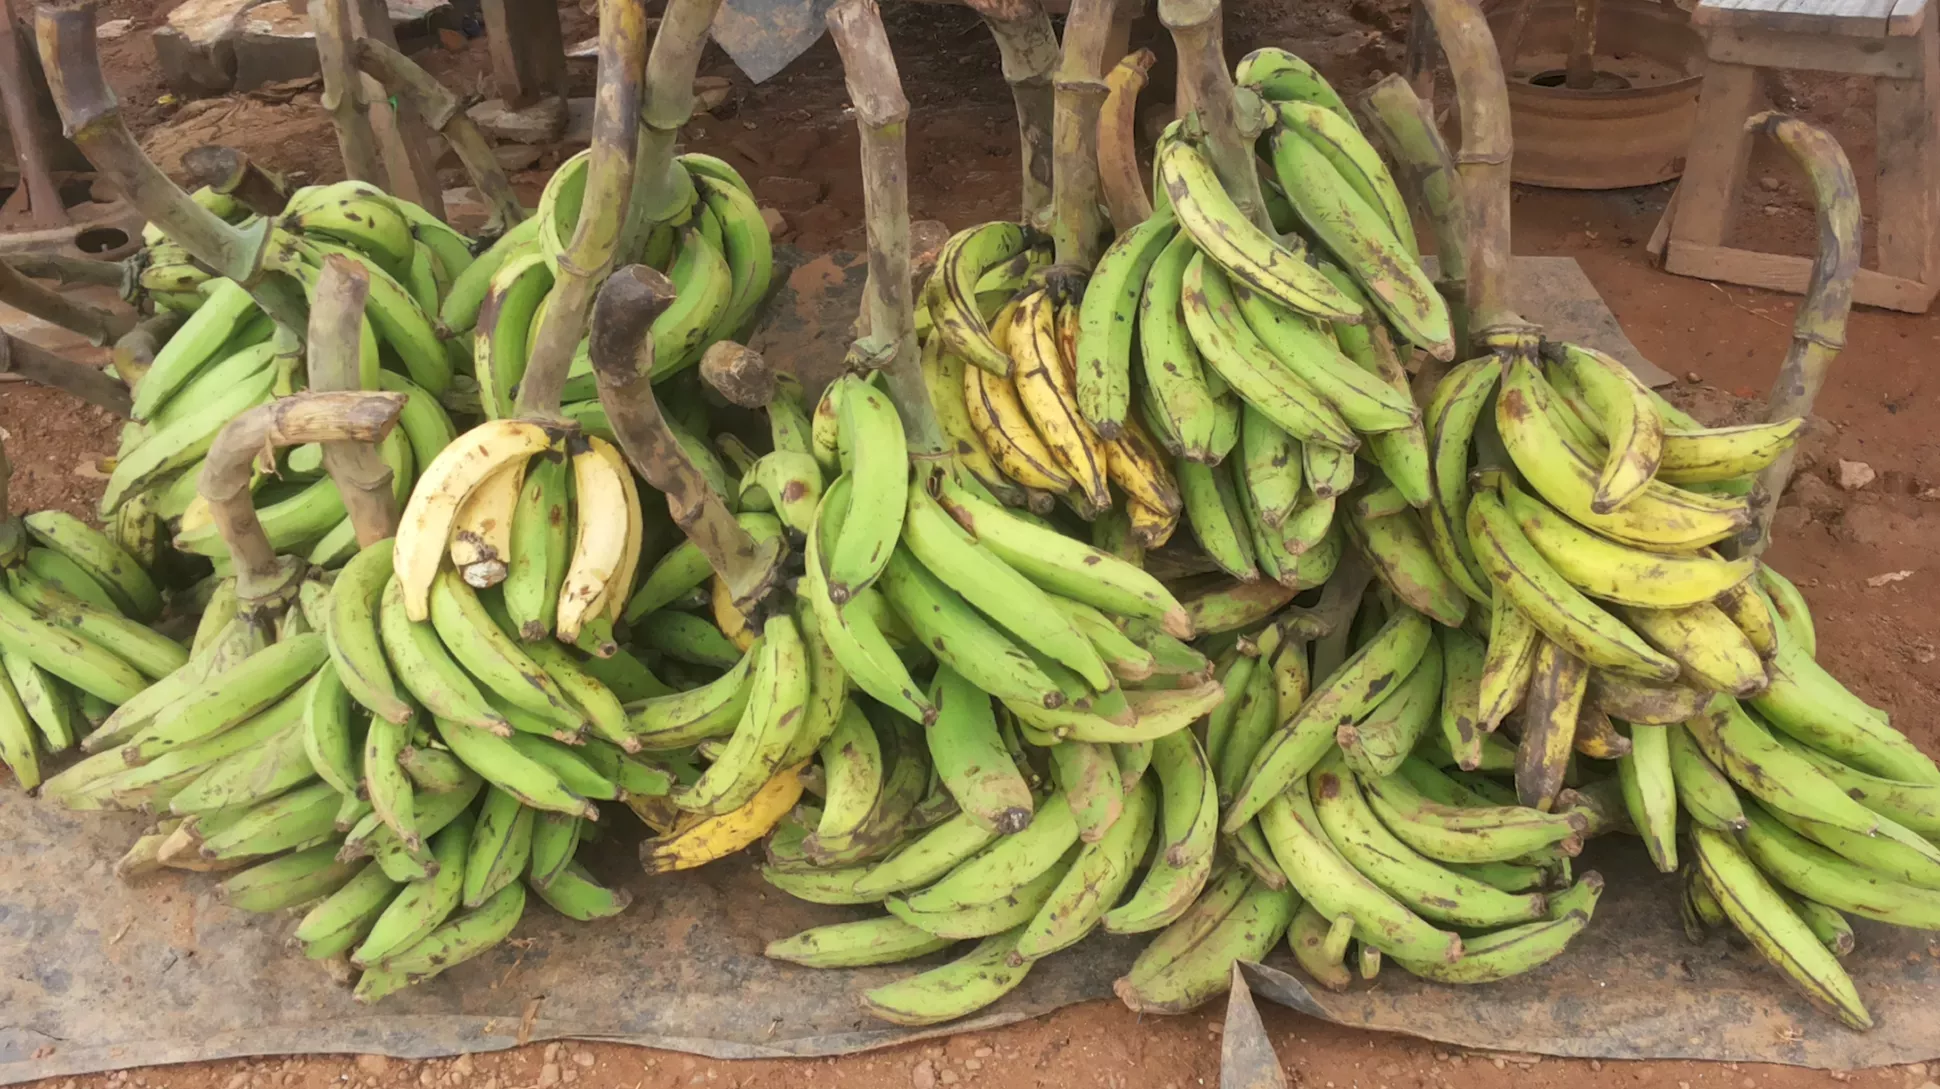 A pile of green and yellow curved plantain fruits on the floor